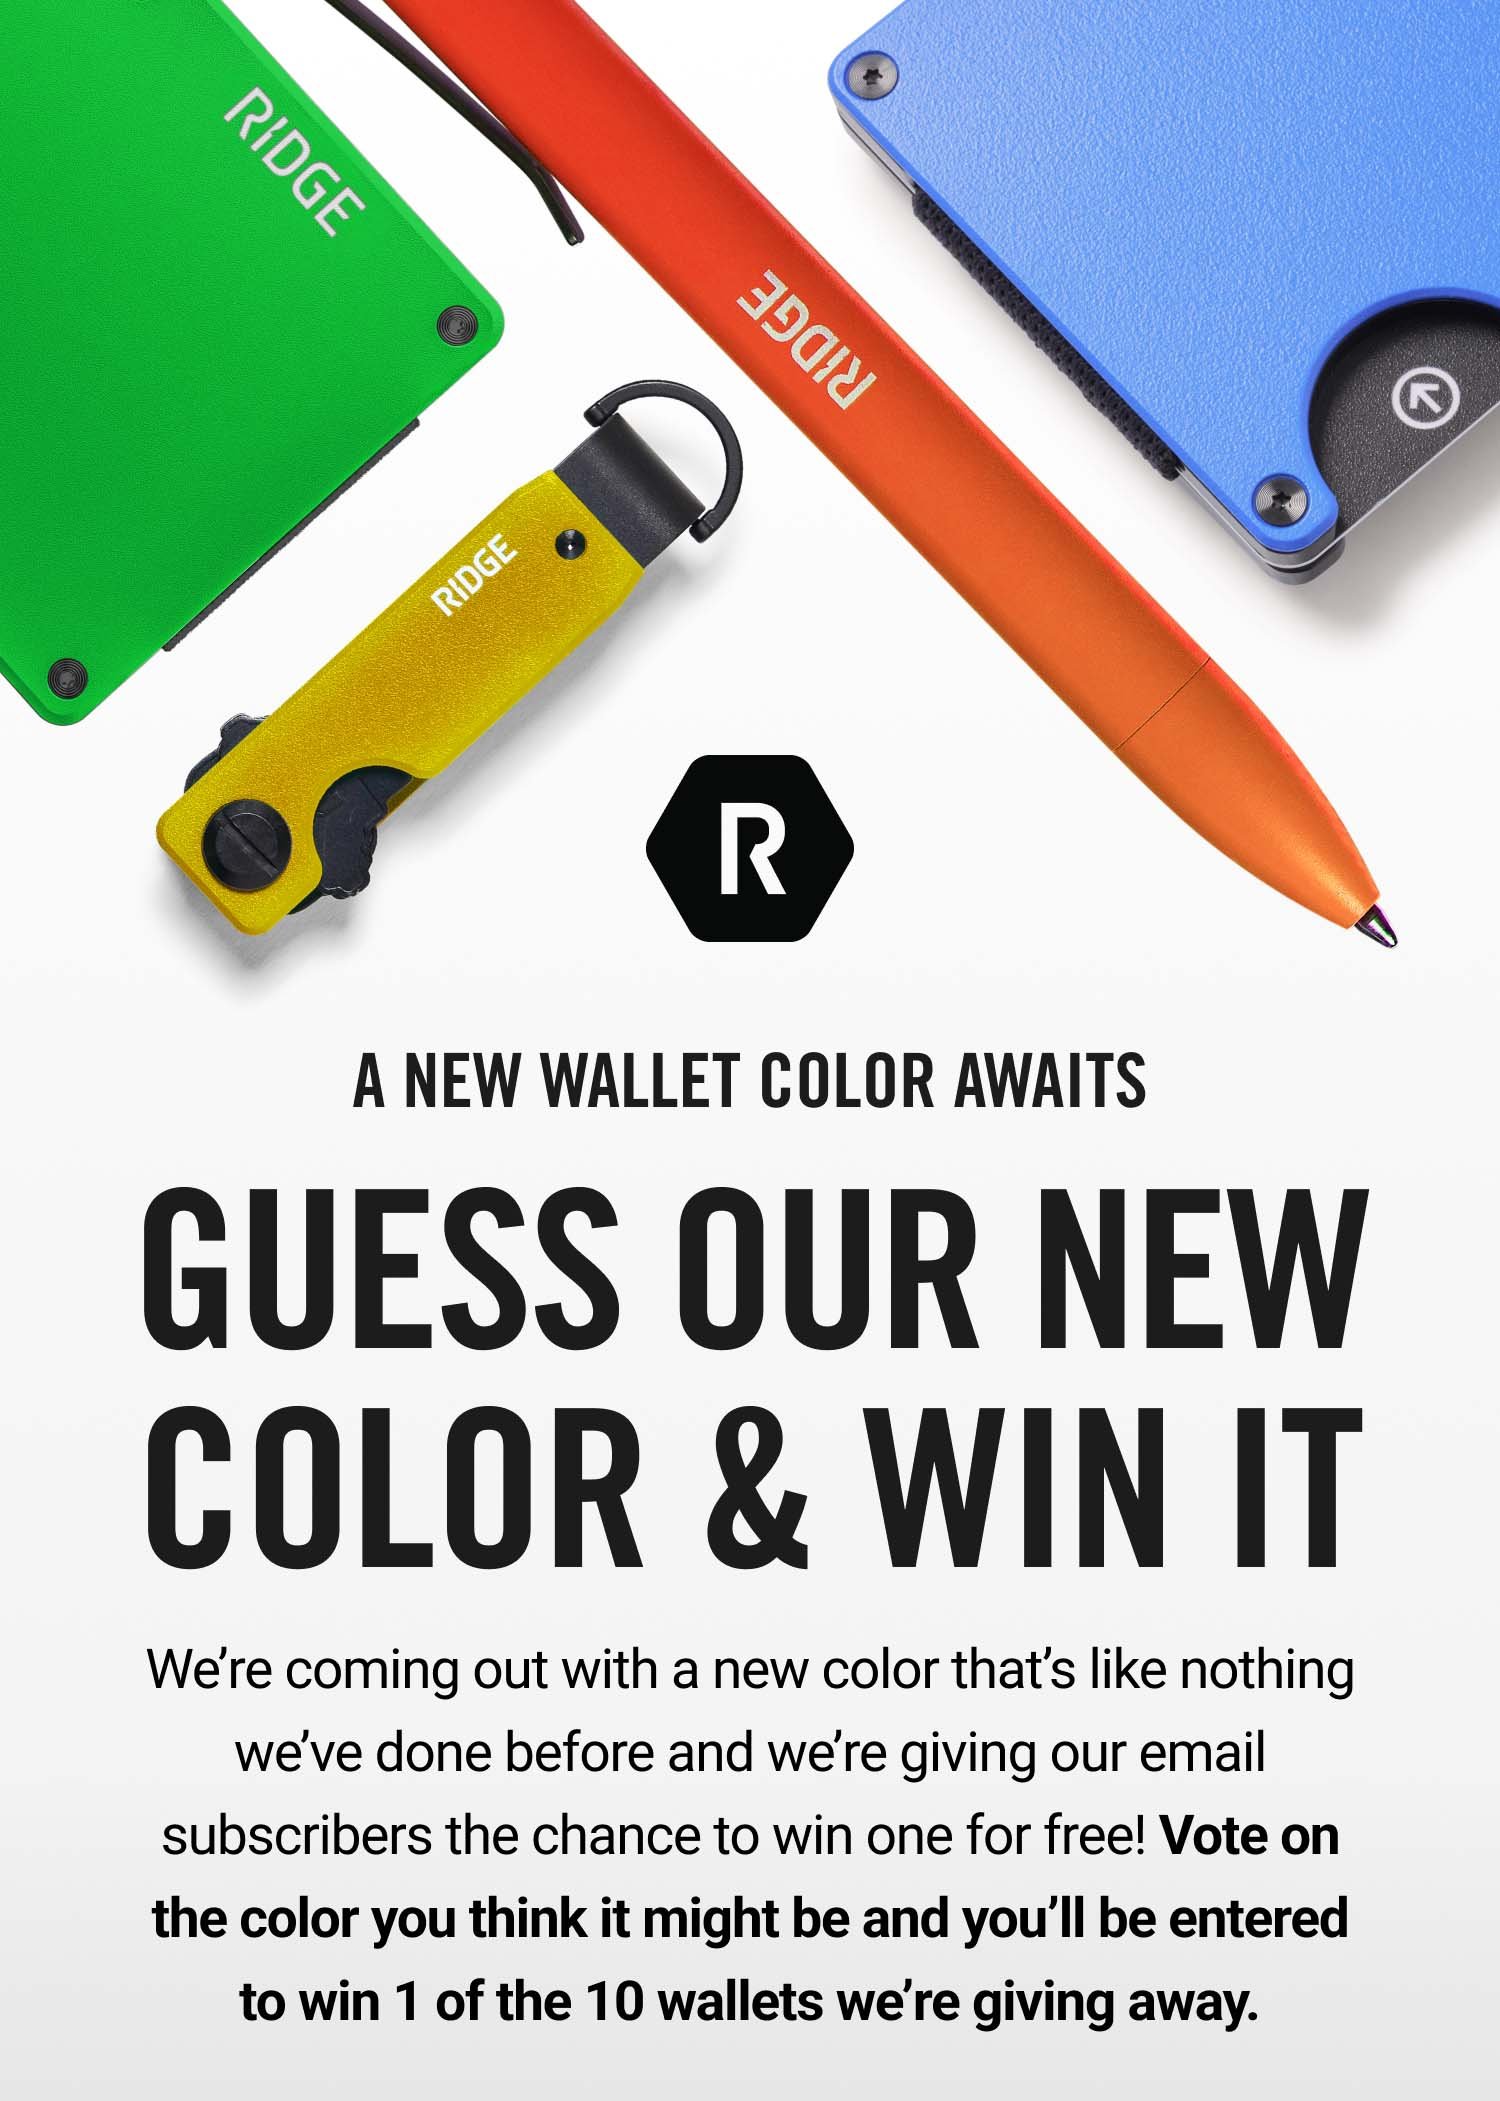 Guess our new color & Win it